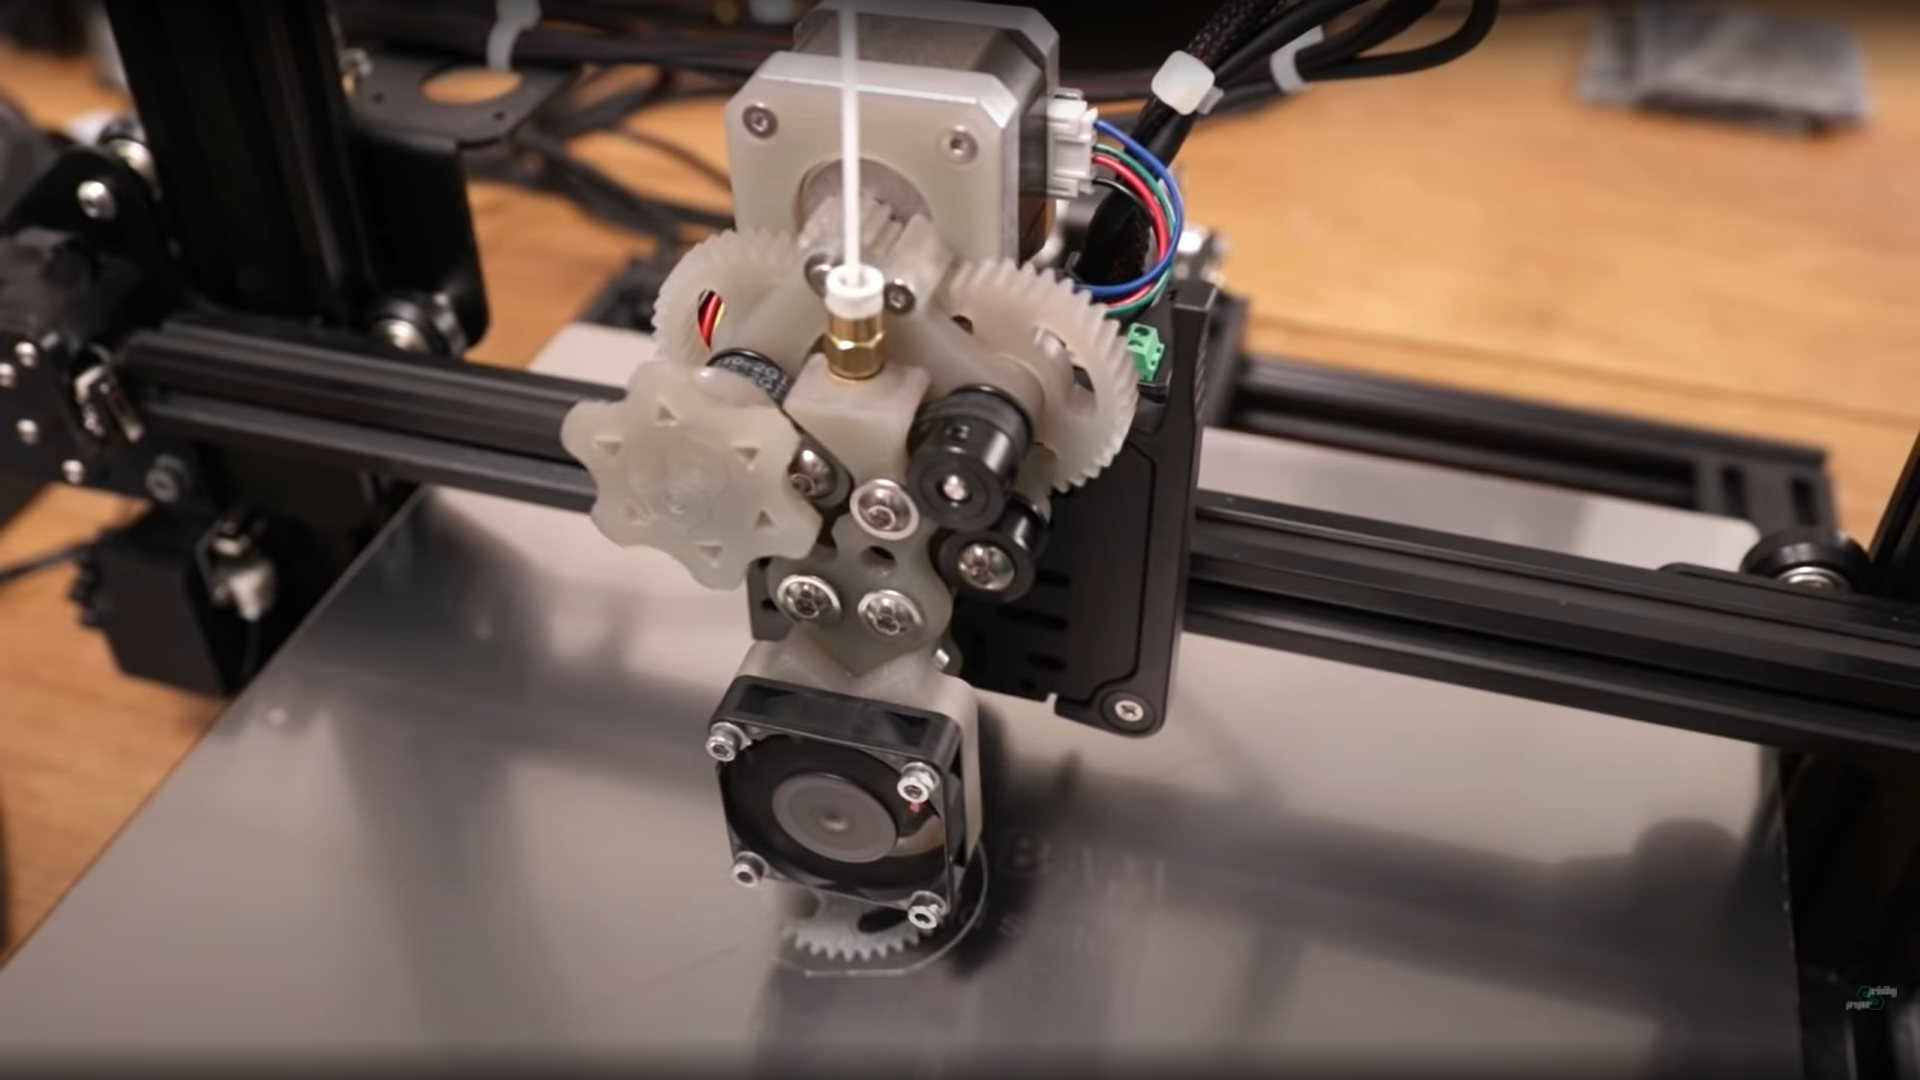 Tame Your Flexible Filaments With This Belt-Drive Extruder